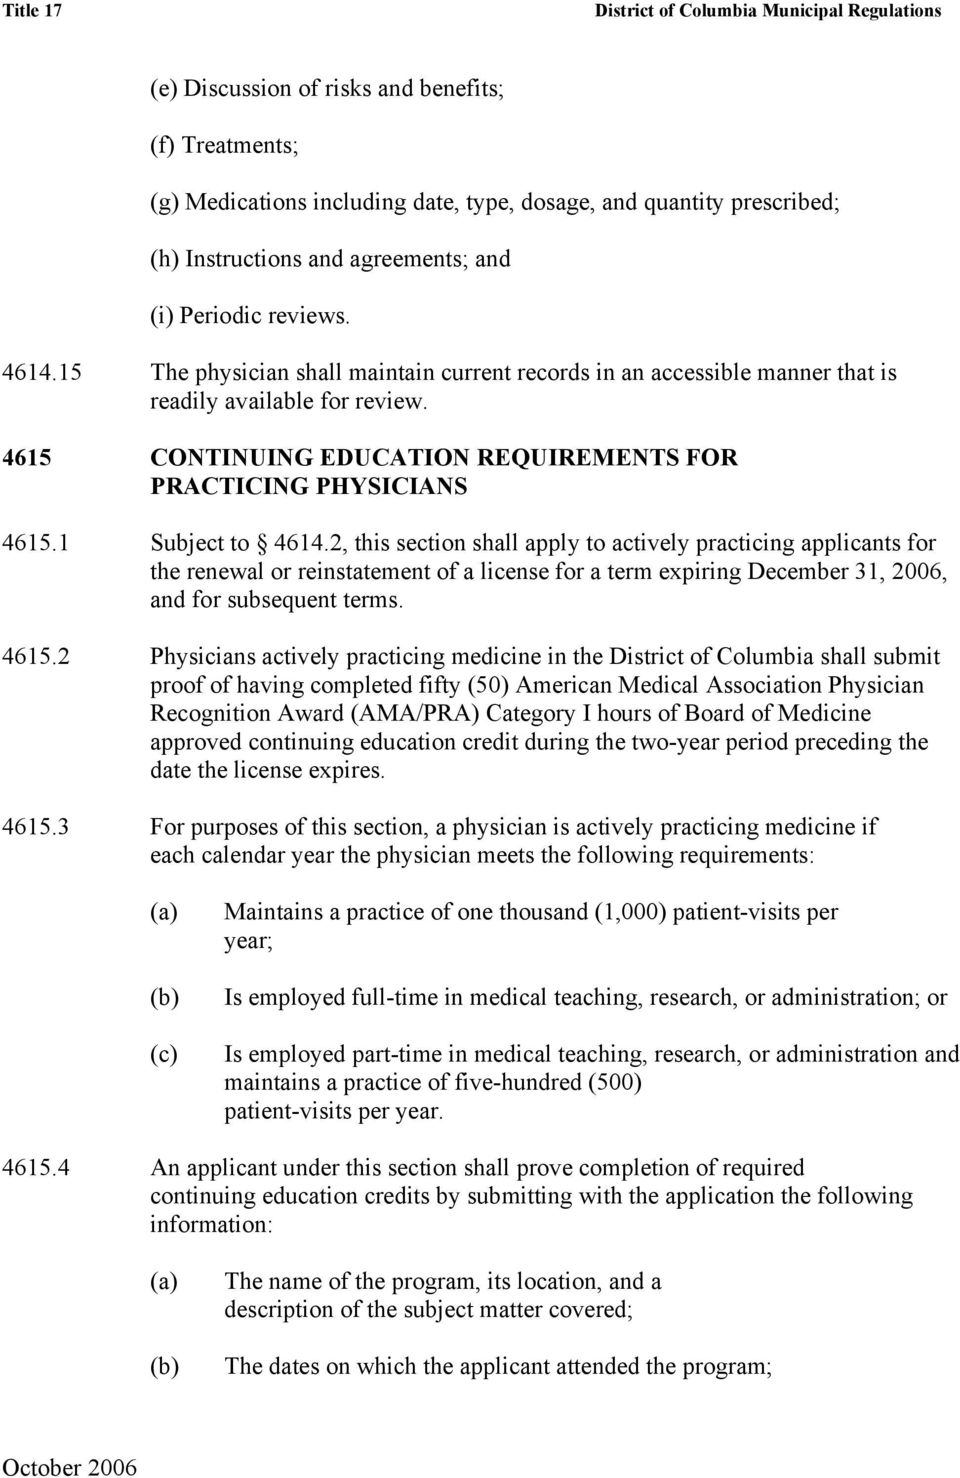 2, this section shall apply to actively practicing applicants for the renewal or reinstatement of a license for a term expiring December 31, 2006, and for subsequent terms. 4615.